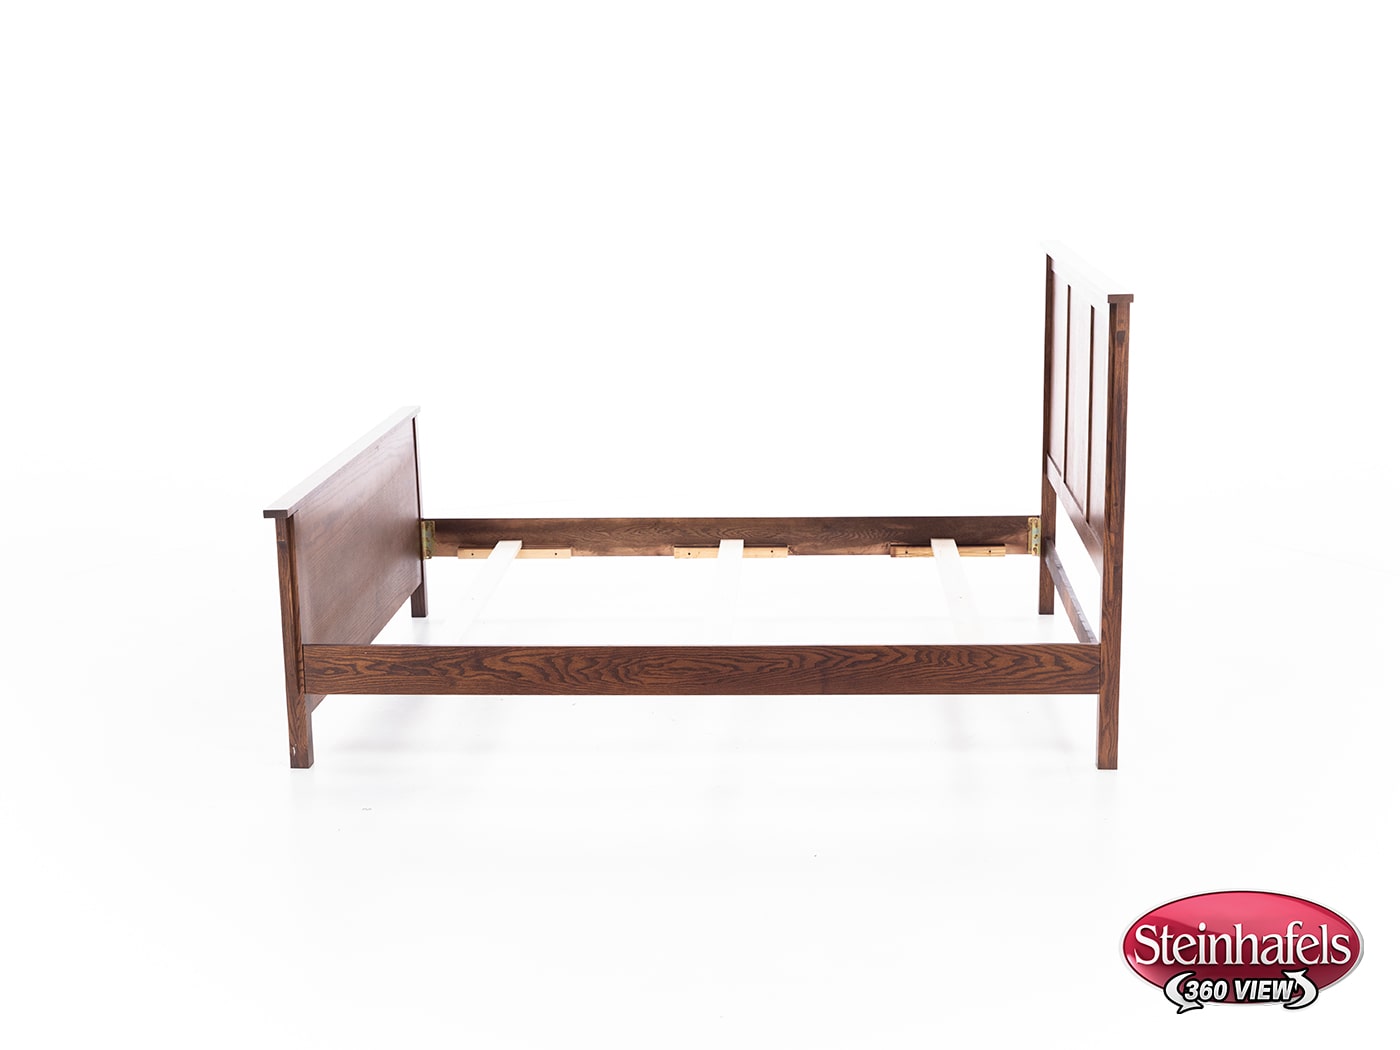 witmer furniture brown full bed package  image tpk  